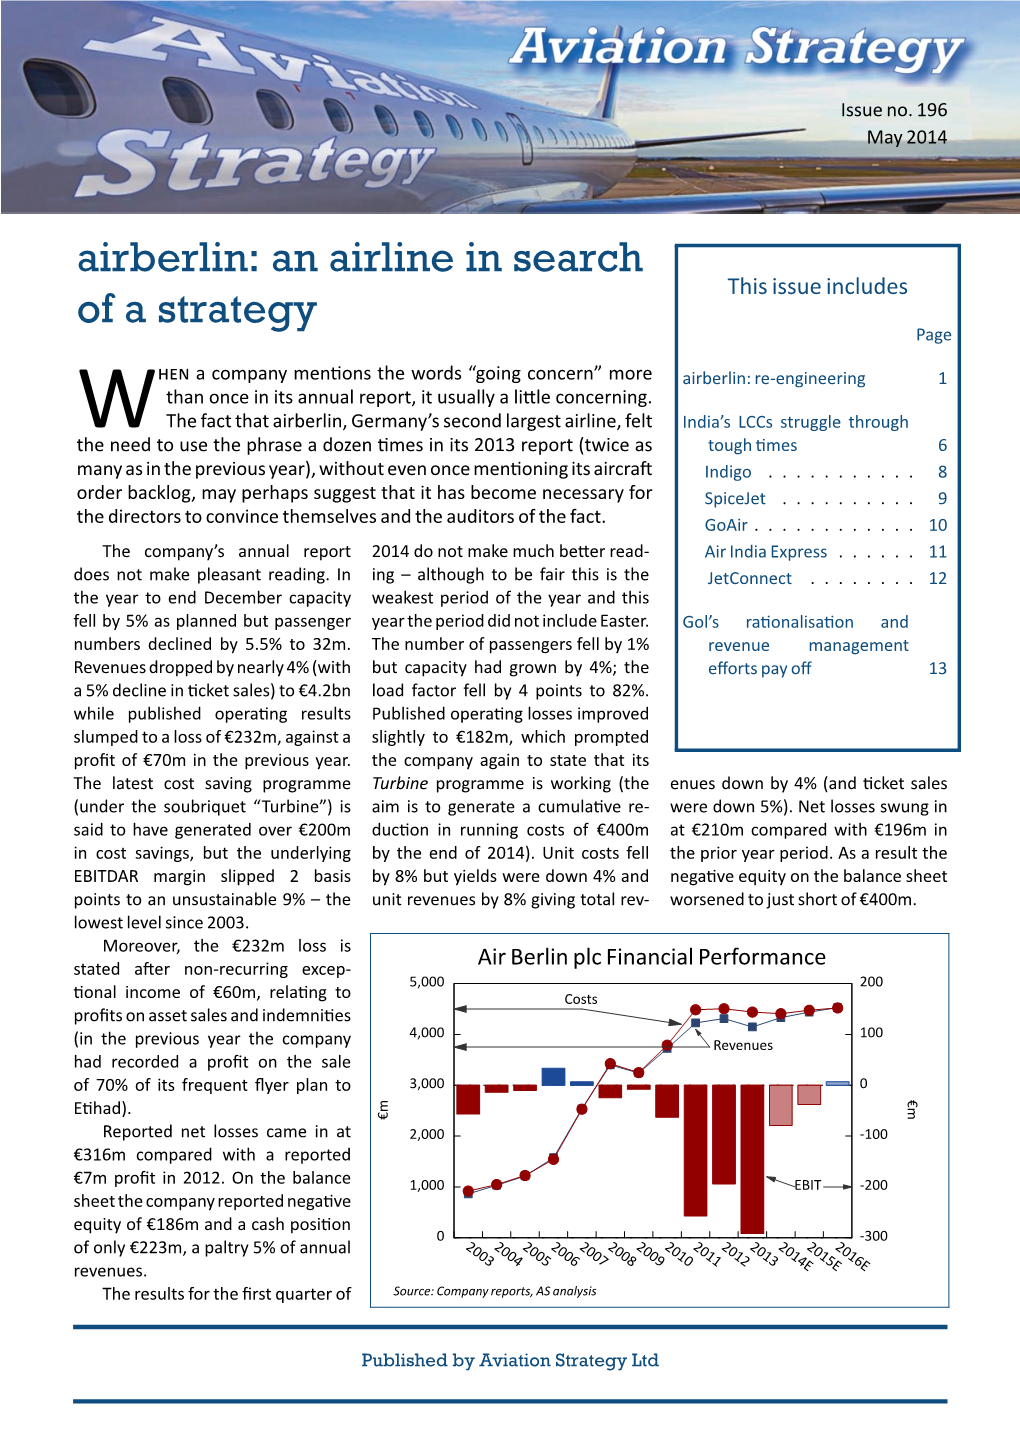 Aviation Strategy Issue #196, May 2014